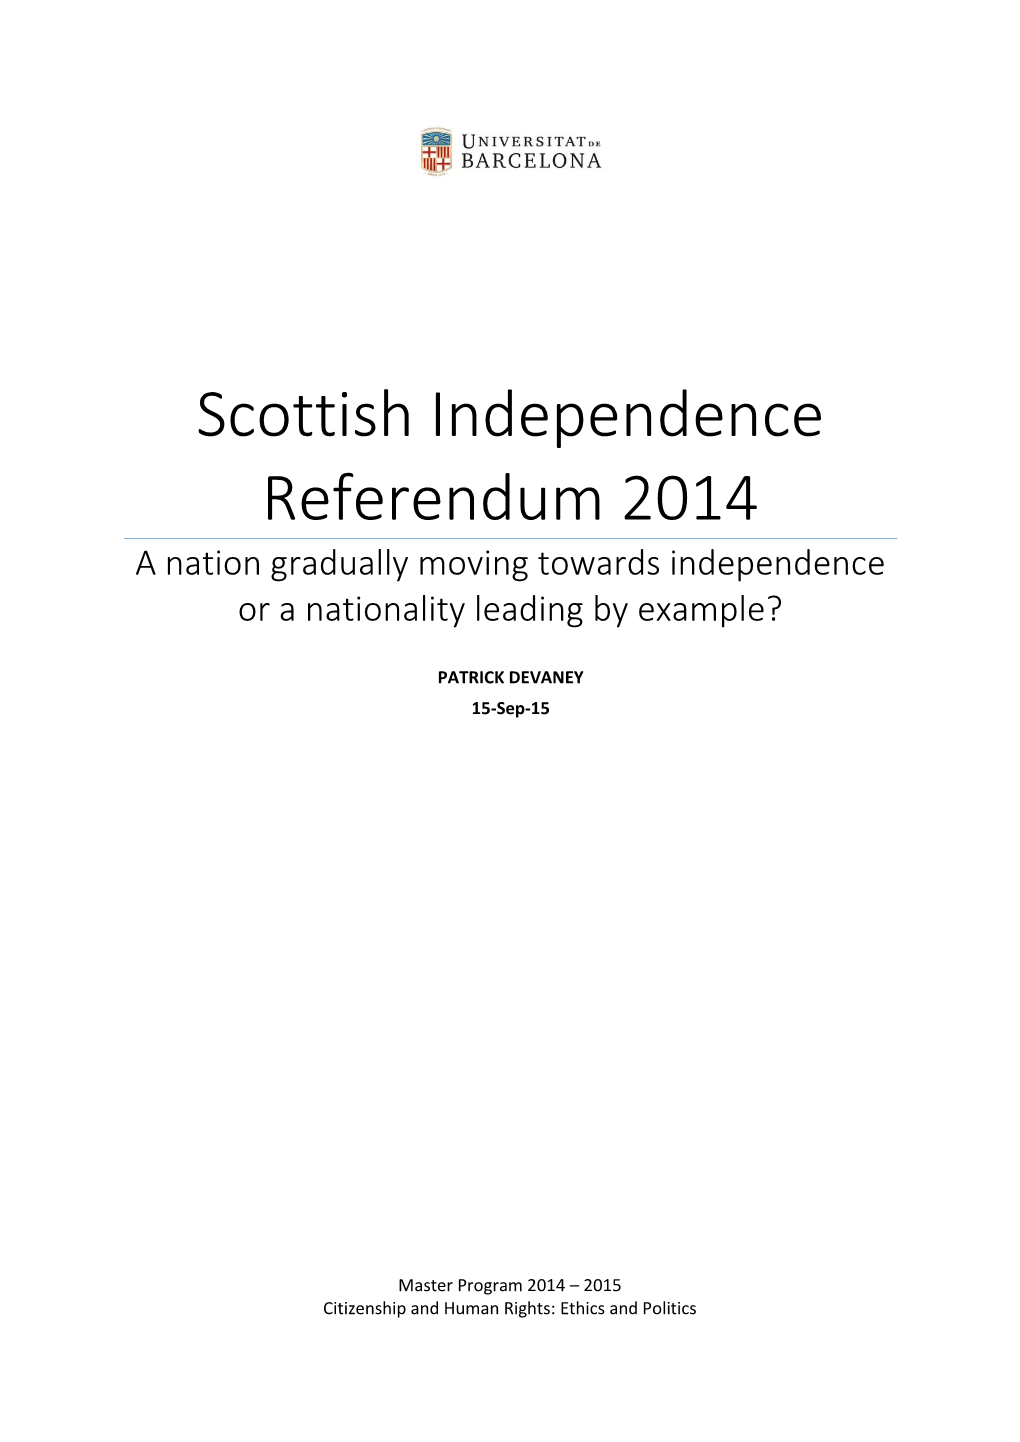 Scottish Independence Referendum 2014 a Nation Gradually Moving Towards Independence Or a Nationality Leading by Example?